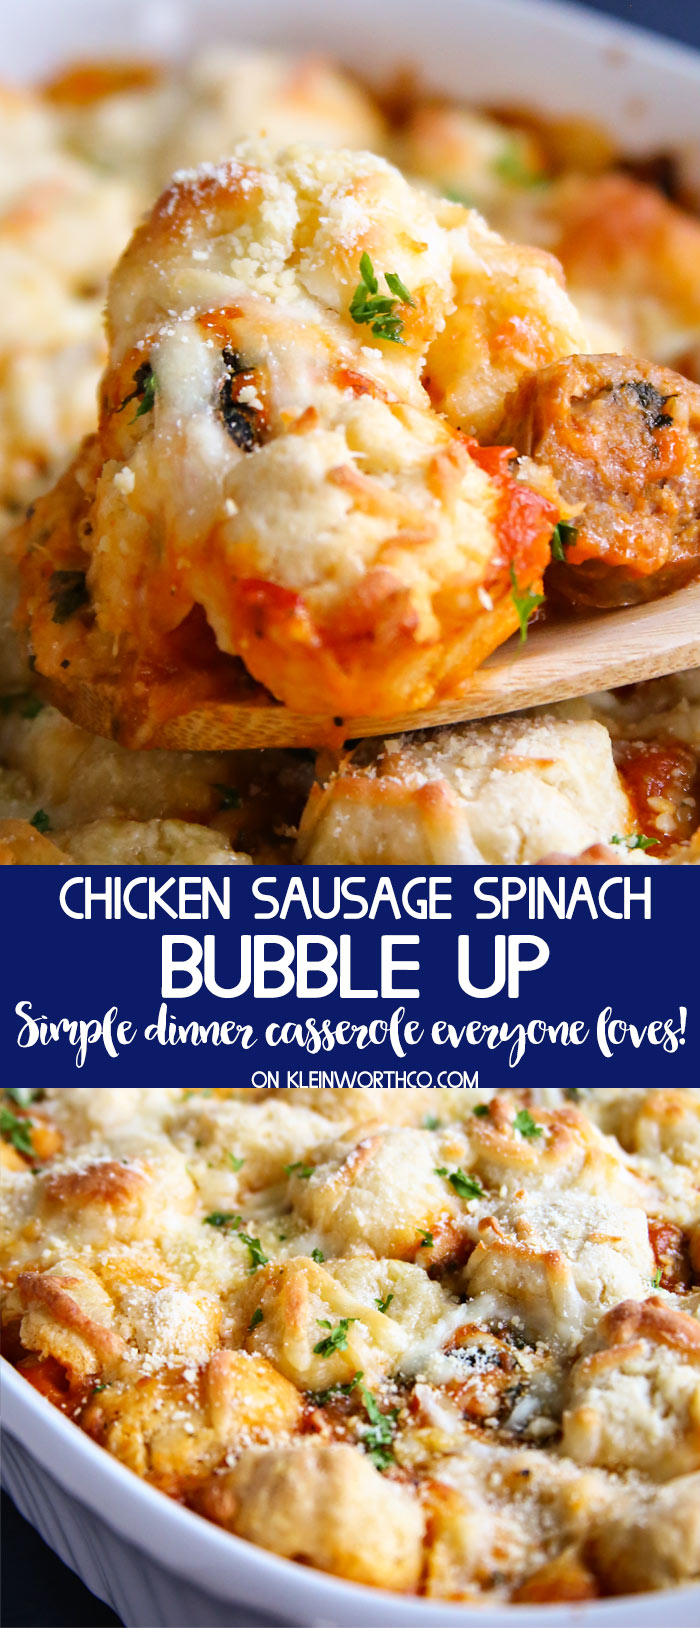 Chicken Spinach & Sausage Bubble Up dinner recipe